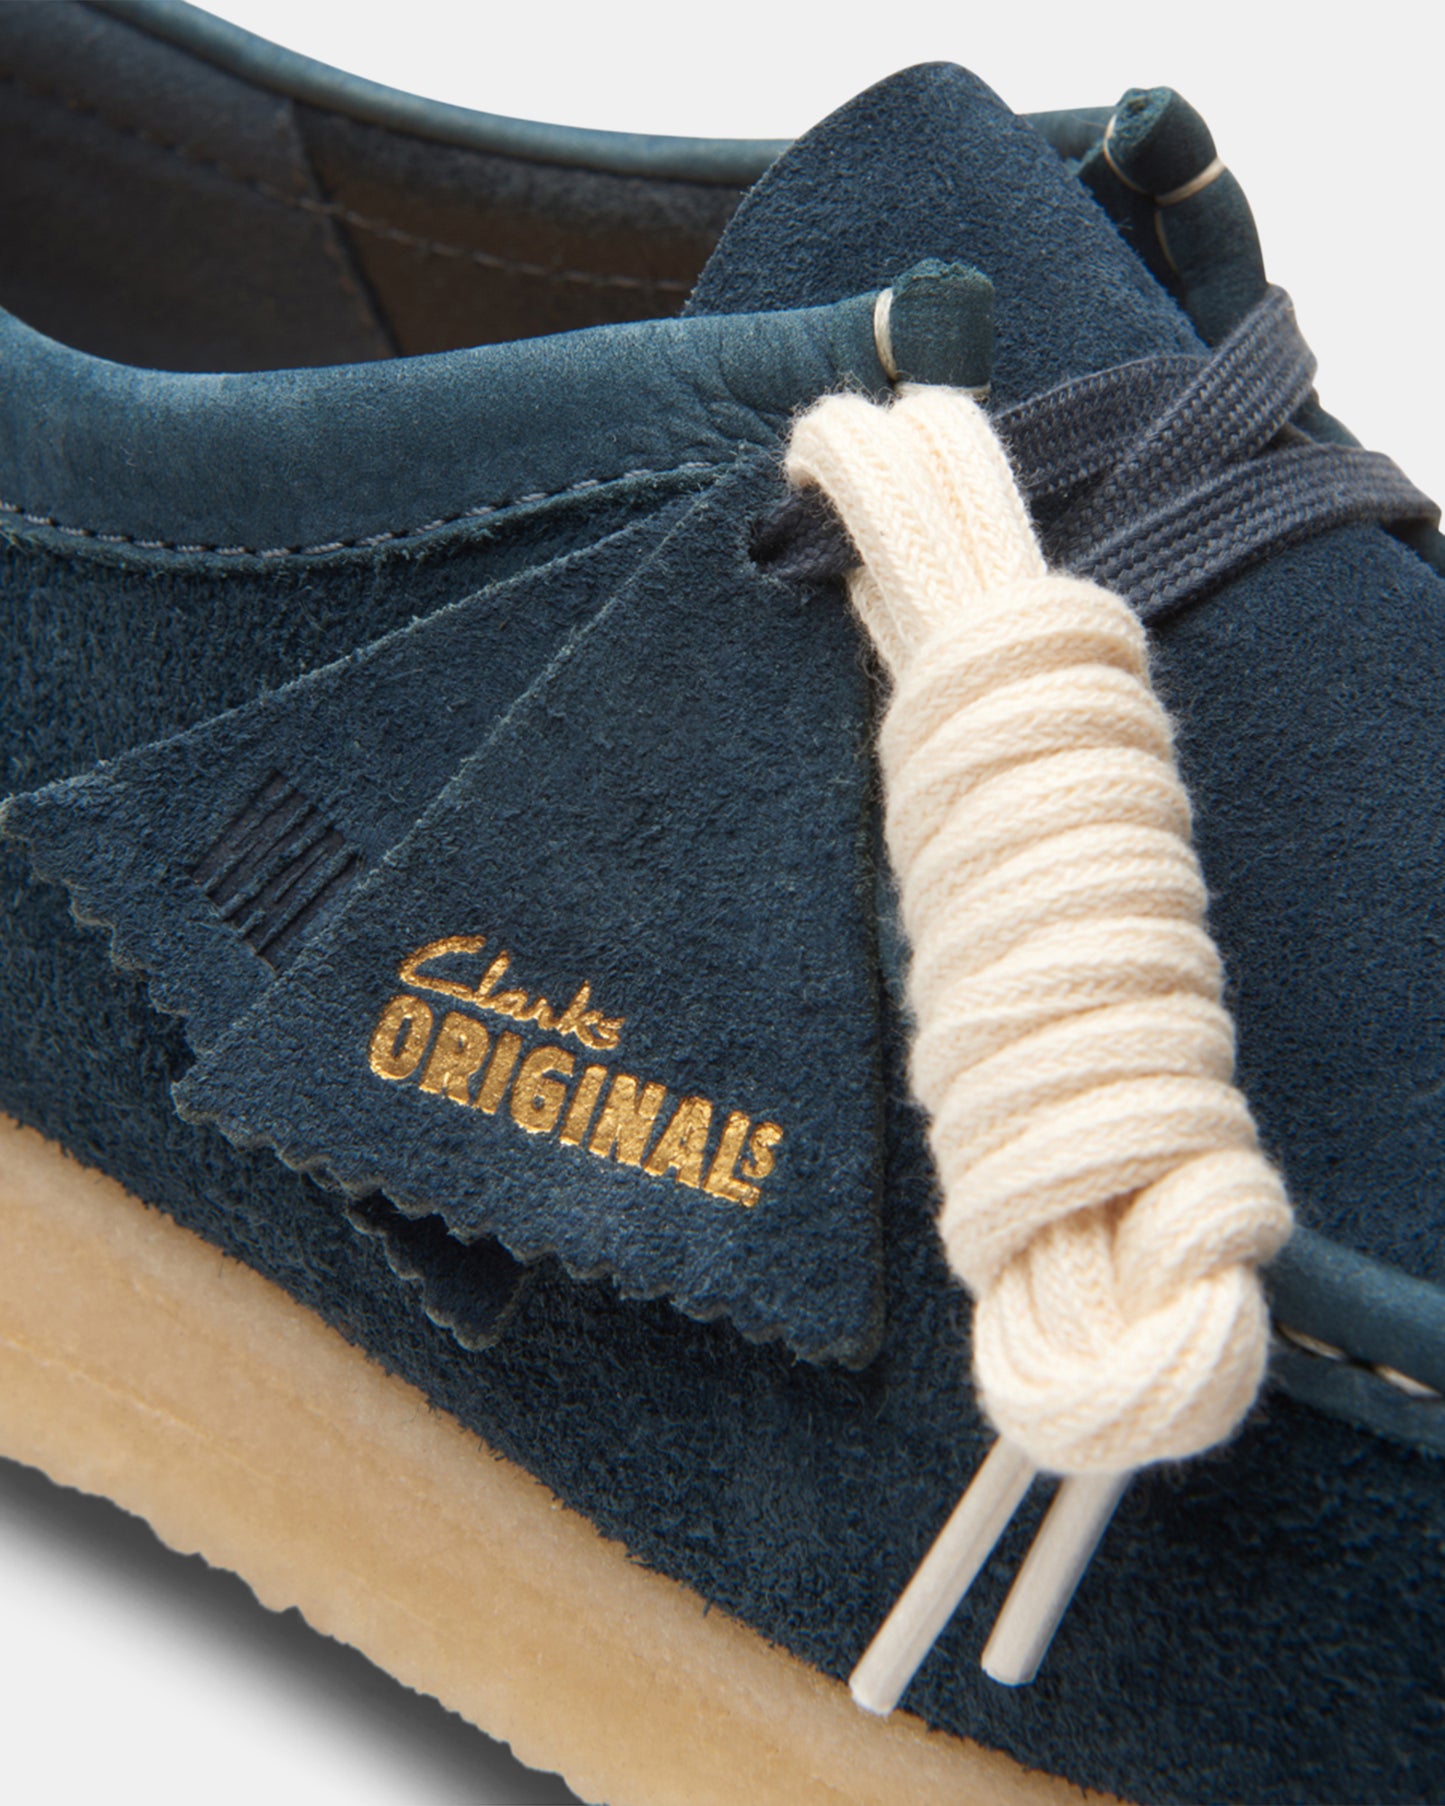 Wallabee (M) Navy/Teal Suede